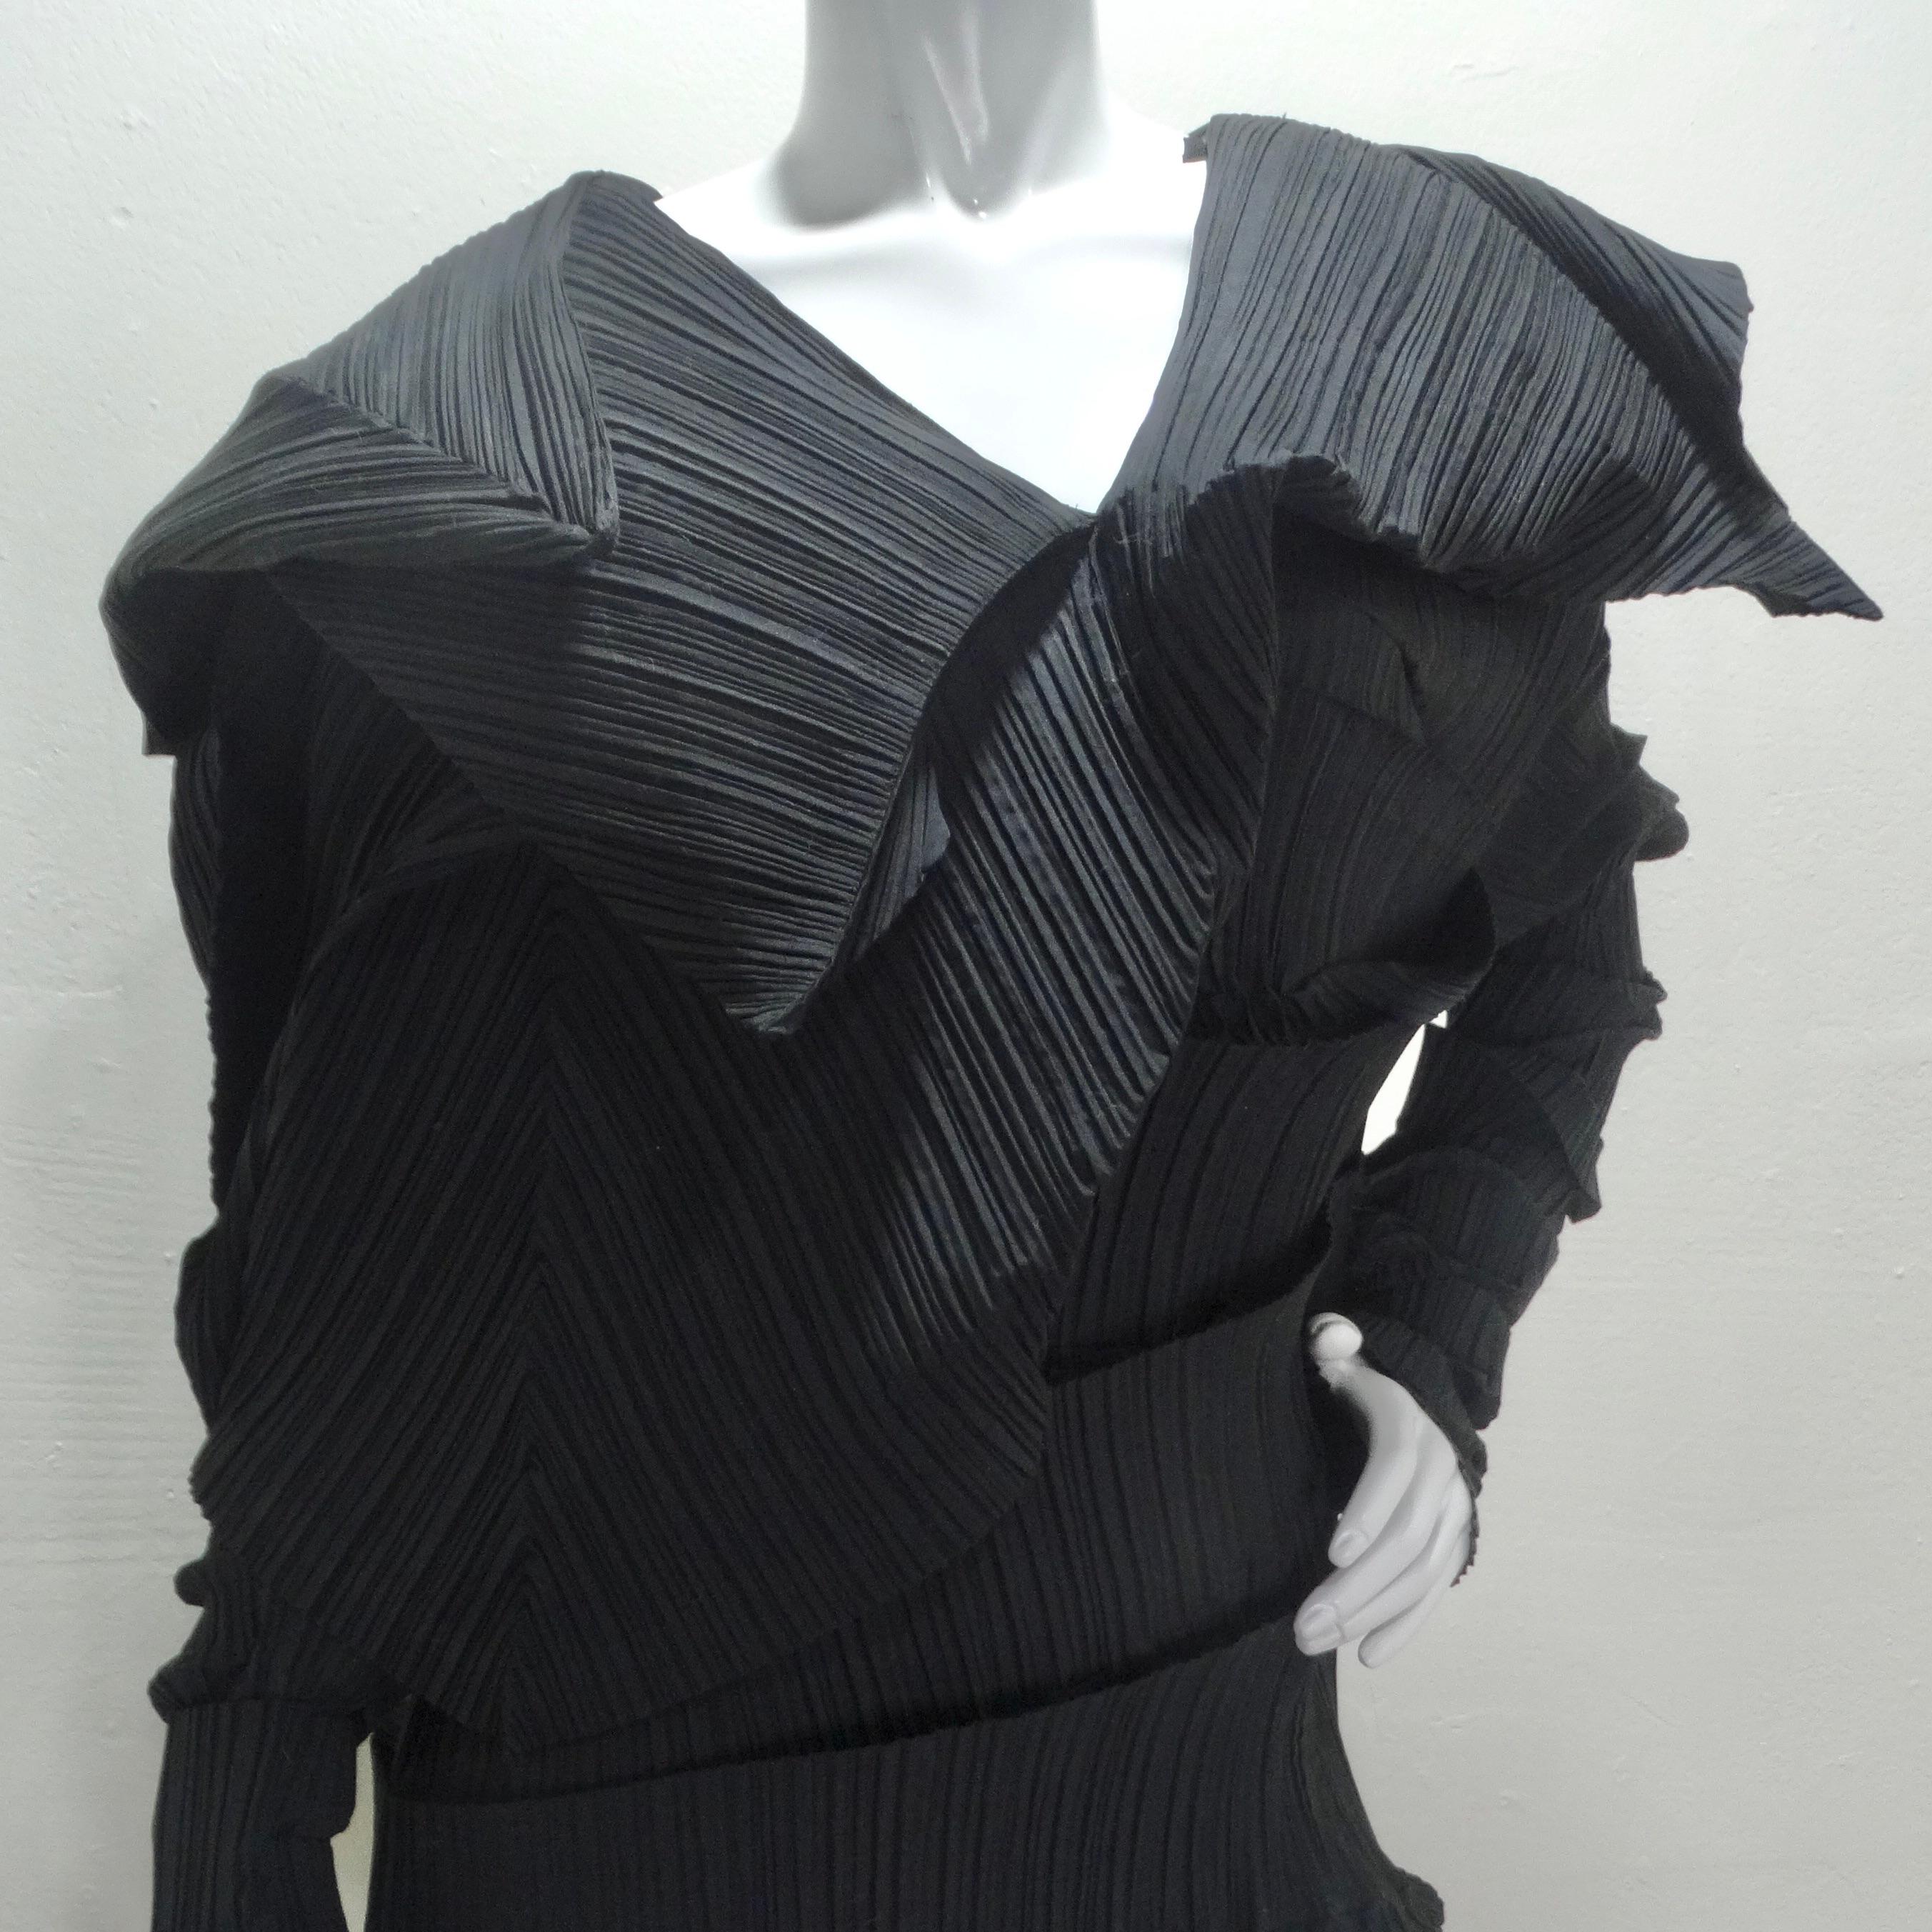 Own a piece of fashion history with this exceptional dress from Issey Miyake's 1989 Reverse Pleats Collection. Crafted in black polyester, an ideal fabric for pleating, this museum-quality dress showcases Miyake's mastery of folding techniques and